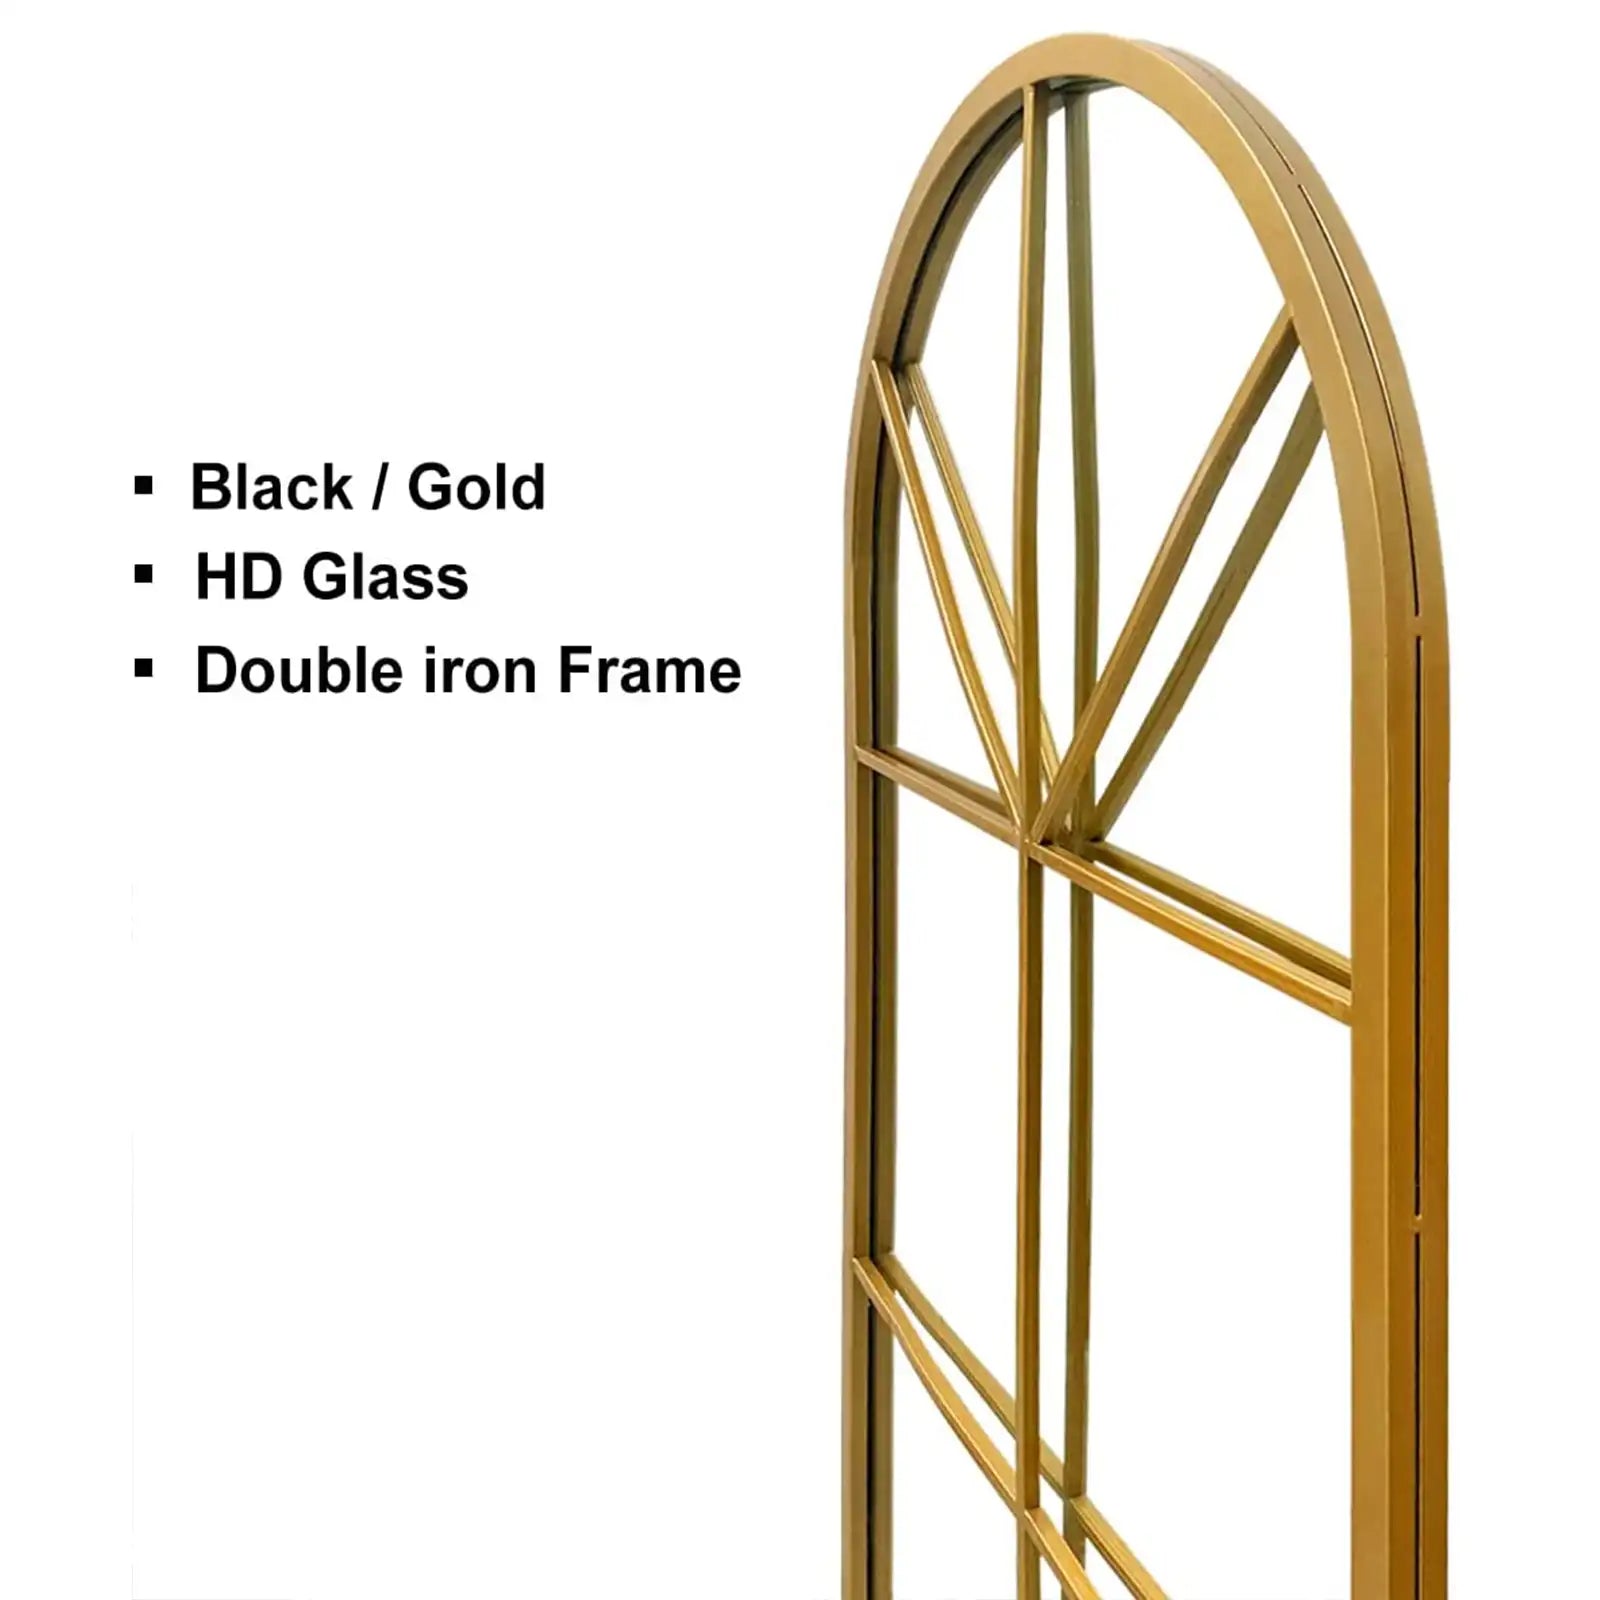 Floor Full Length Mirror, Gold Arched-Top Mirror Full Length, Large Windows Pane Mirror, Wall Mounted Mirror, 65"x22" Standing Mirror Hanging or Leaning, Body Mirrors for Bedroom, No Stand